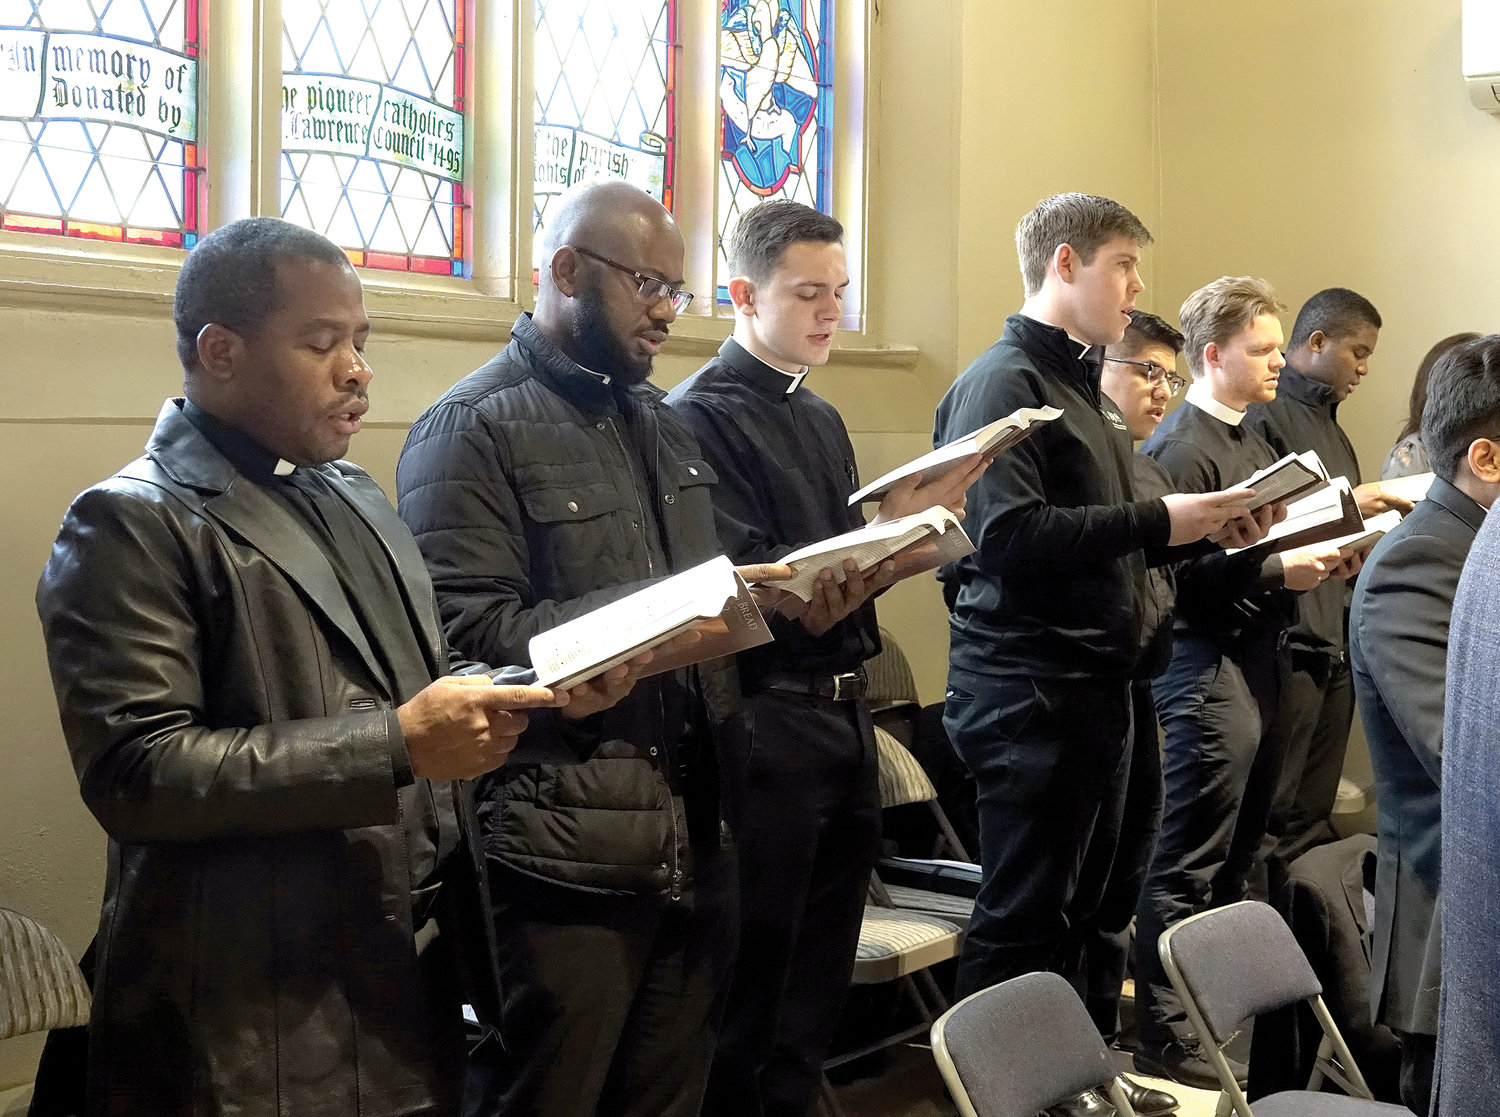 Seminarians sing with the parish choir during Mass at St. Lawrence O’Toole Church in Brewster Feb. 13.